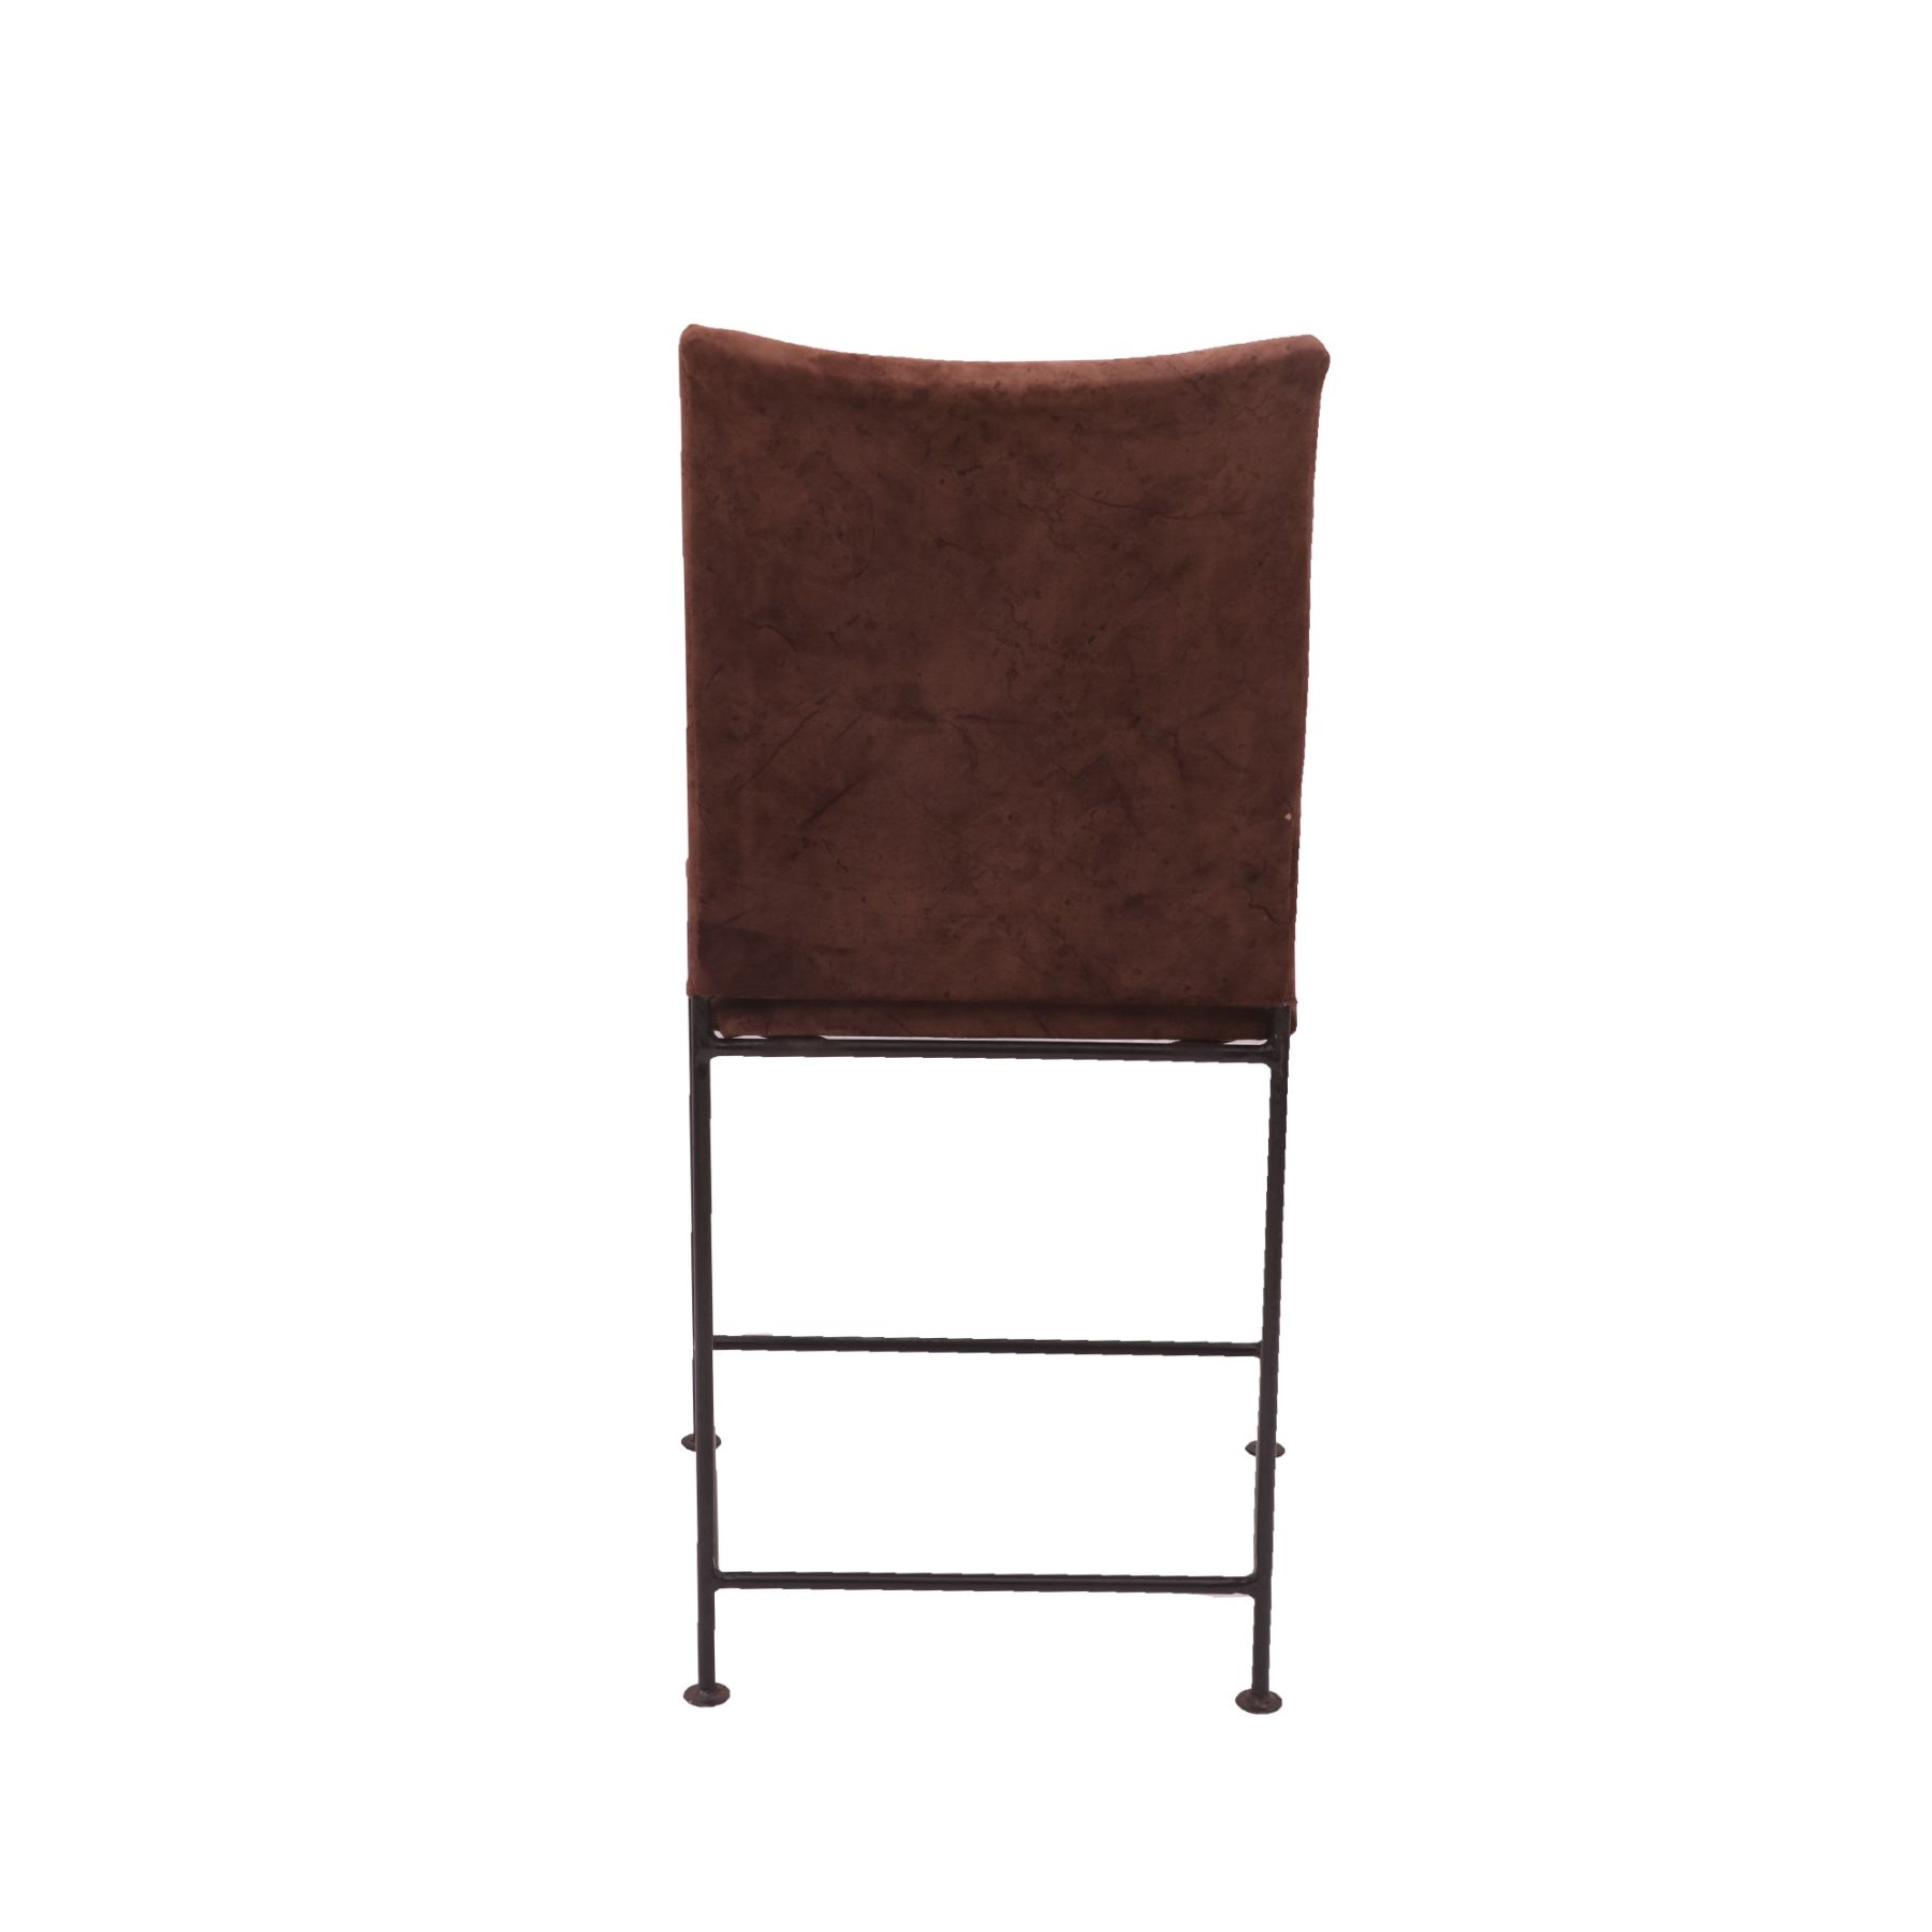 (Set of 2) Handsome Brown Upholstered Chair Dining Chair